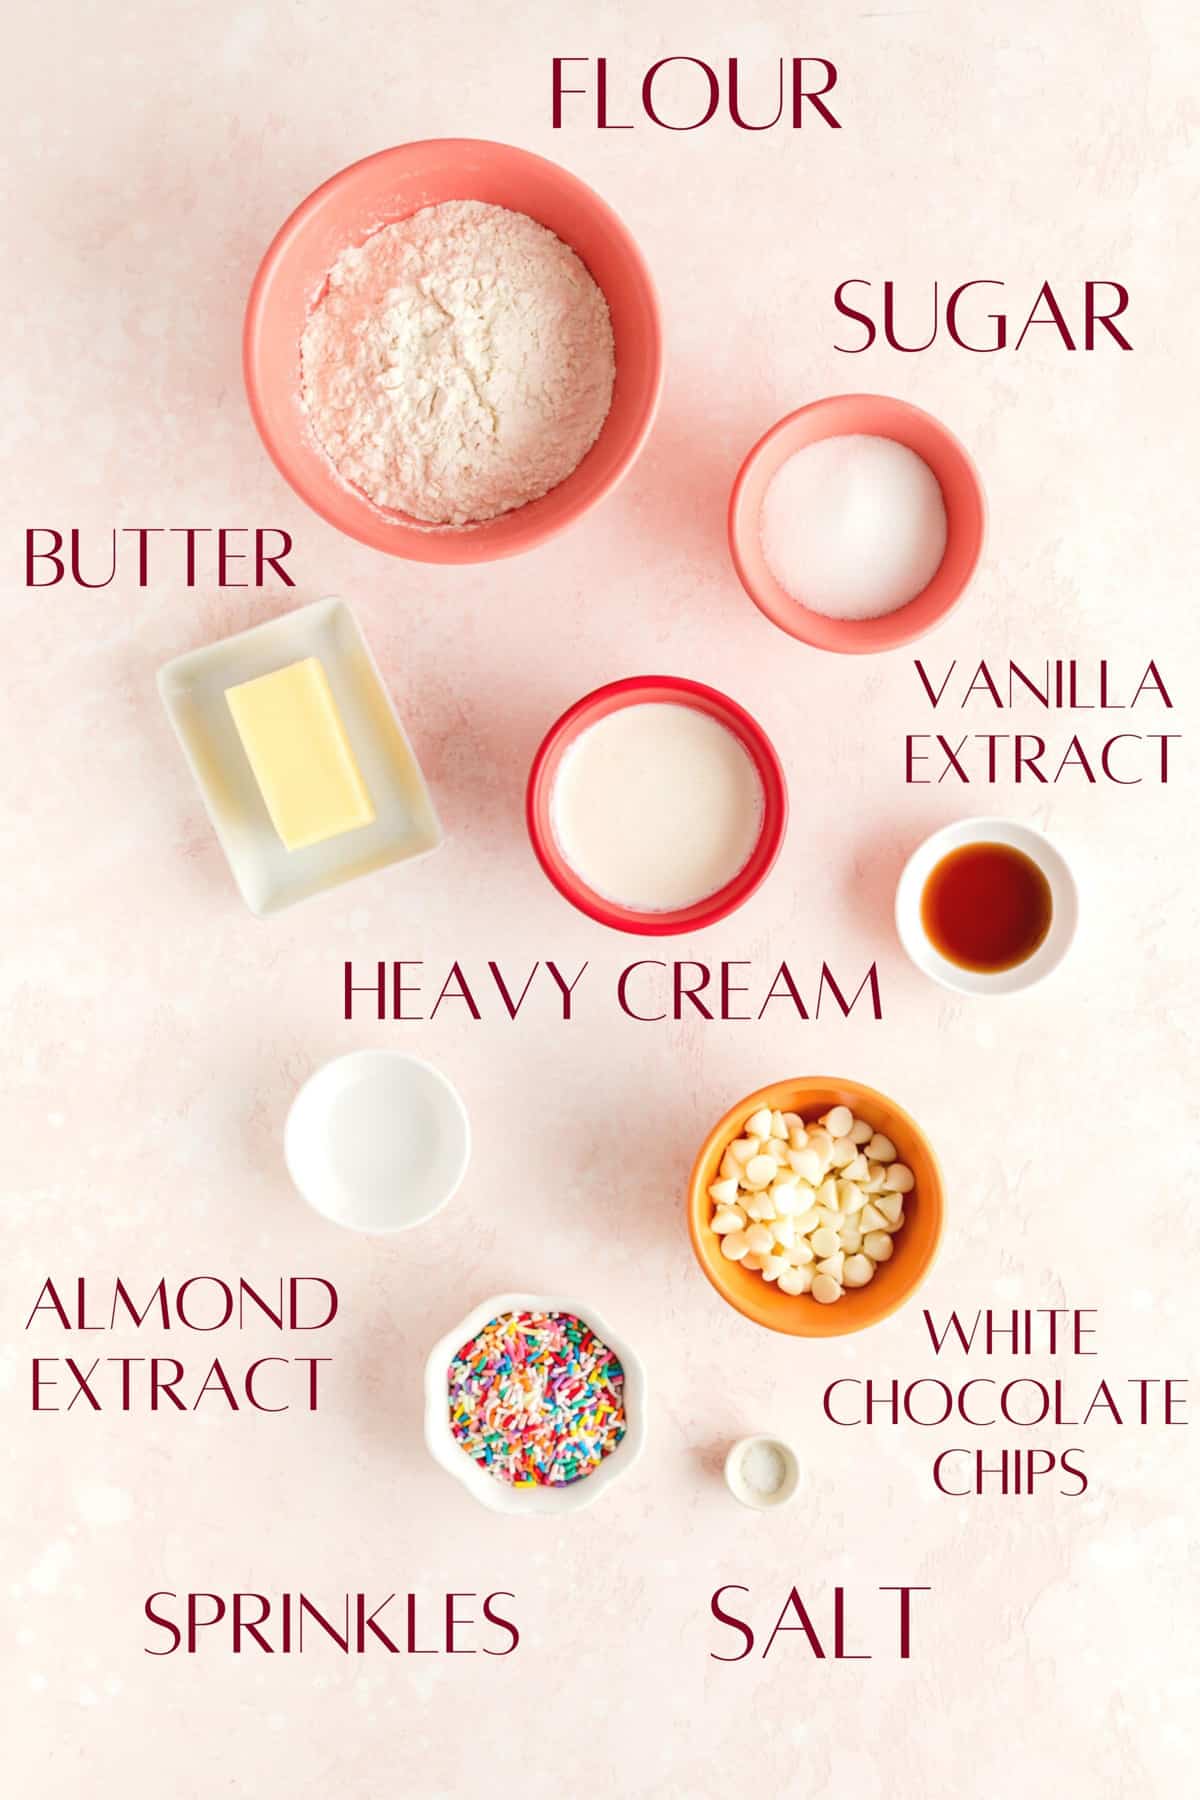 Ingredients in individual bowls for making edible Funfetti sugar cookie dough.